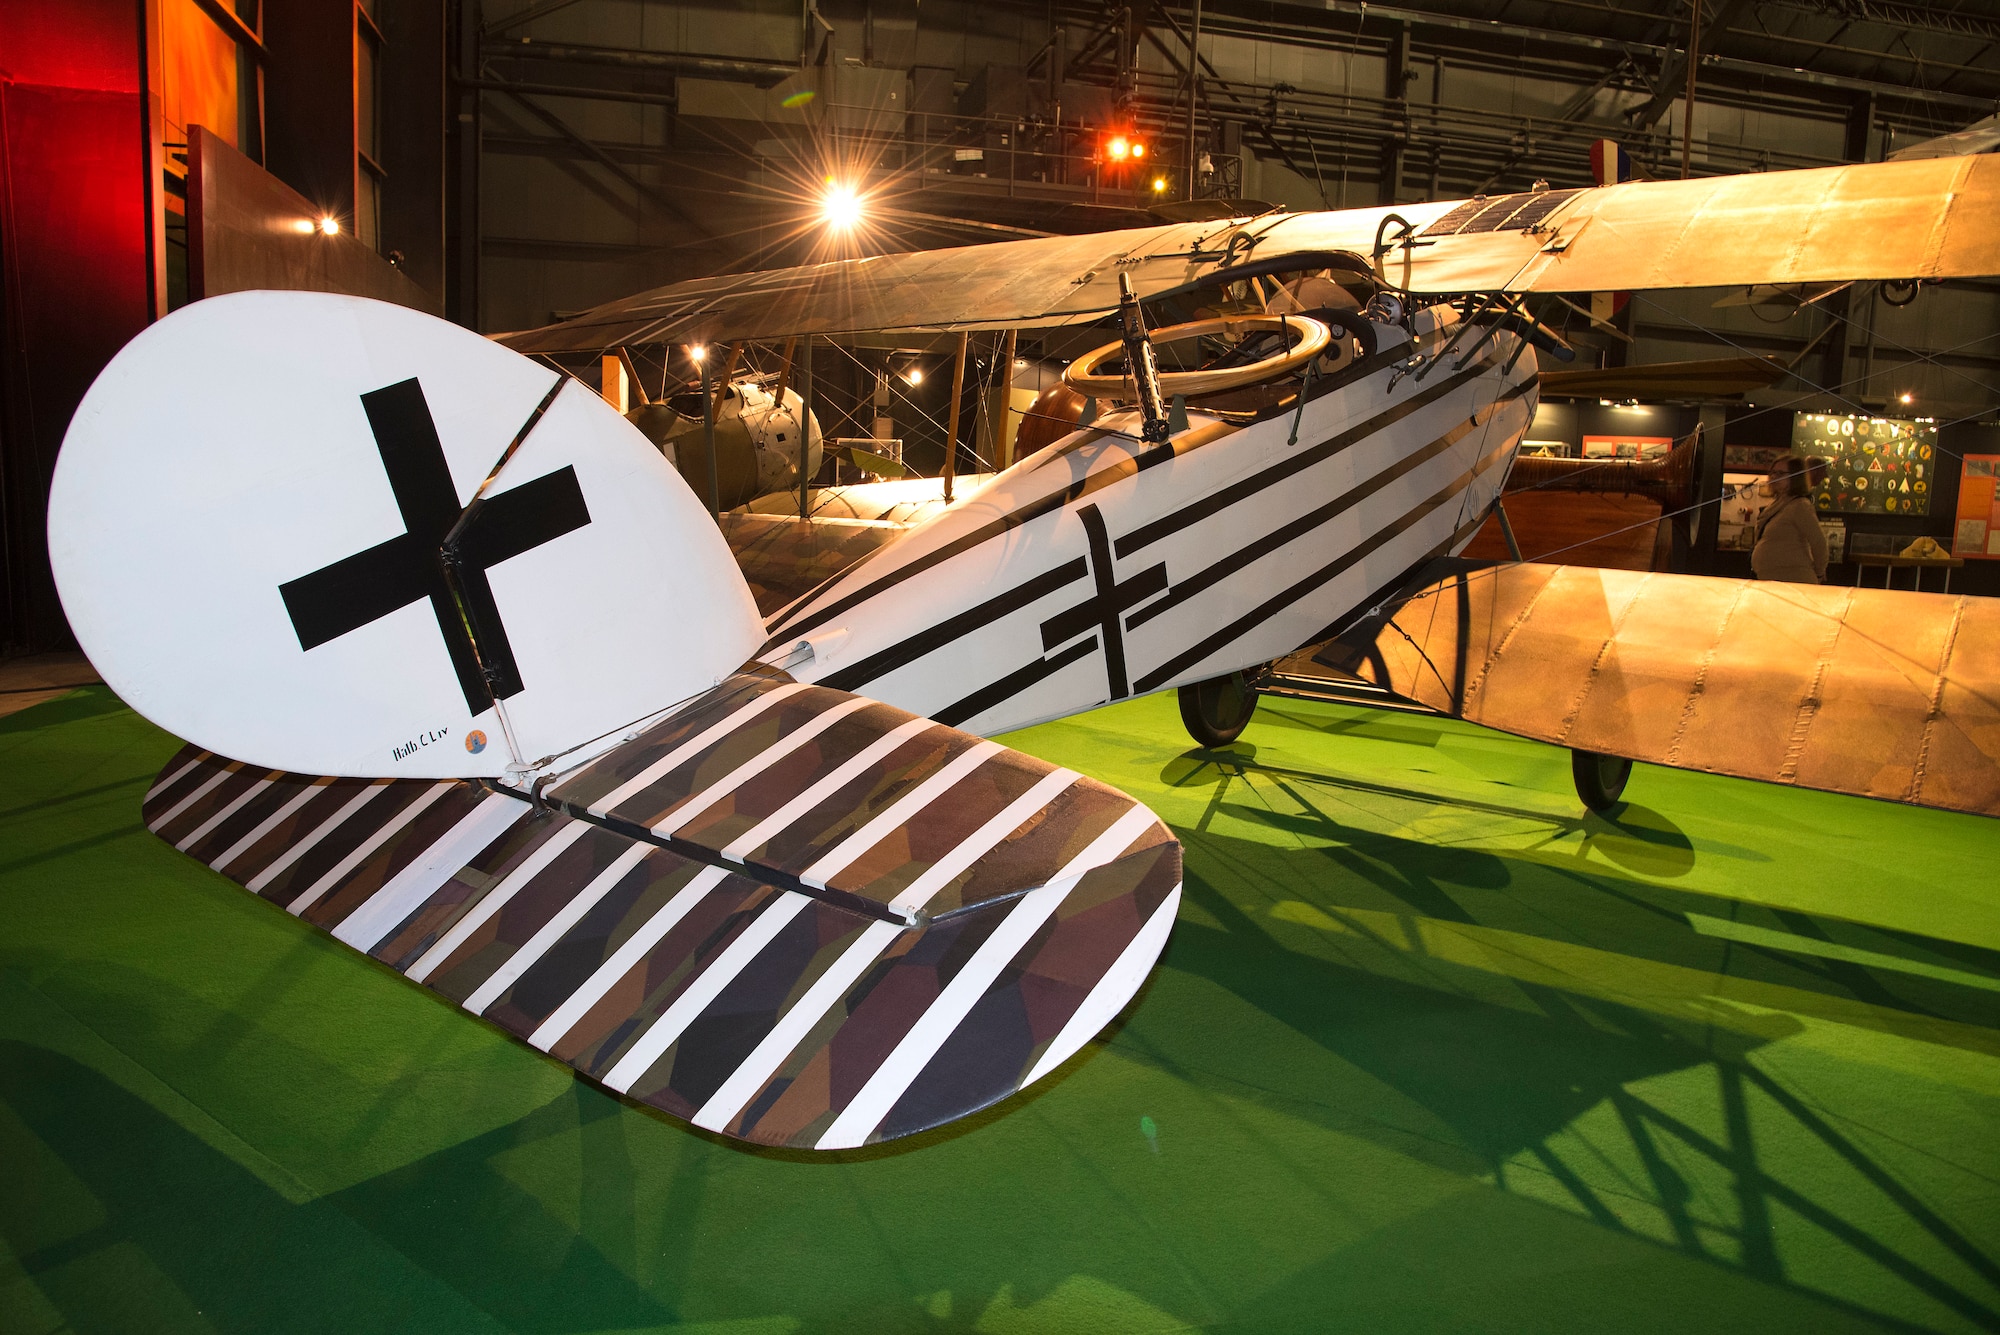 DAYTON, Ohio -- Halberstadt CL IV in the Early Years Gallery at the National Museum of the United States Air Force. (U.S. Air Force photo by Ken LaRock)